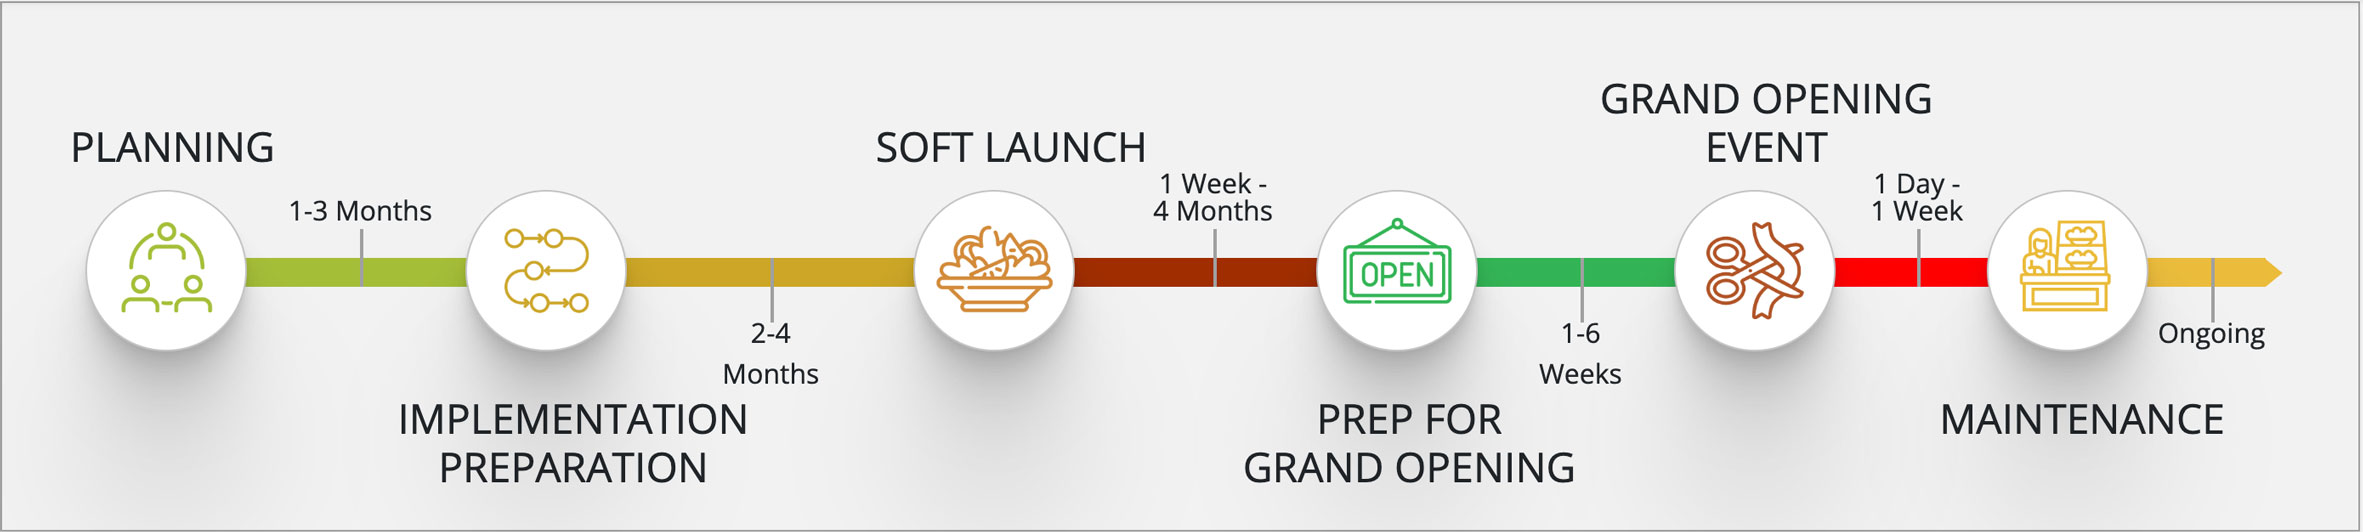 Timeline: Planning (1-3 months), Implementation Preparation (2-4 months), Soft Launch (1 week-4 months), Prep for Grand Opening (1-6 weeks), Grand Opening Event (1 day-1 week), Maintenance (Ongoing)